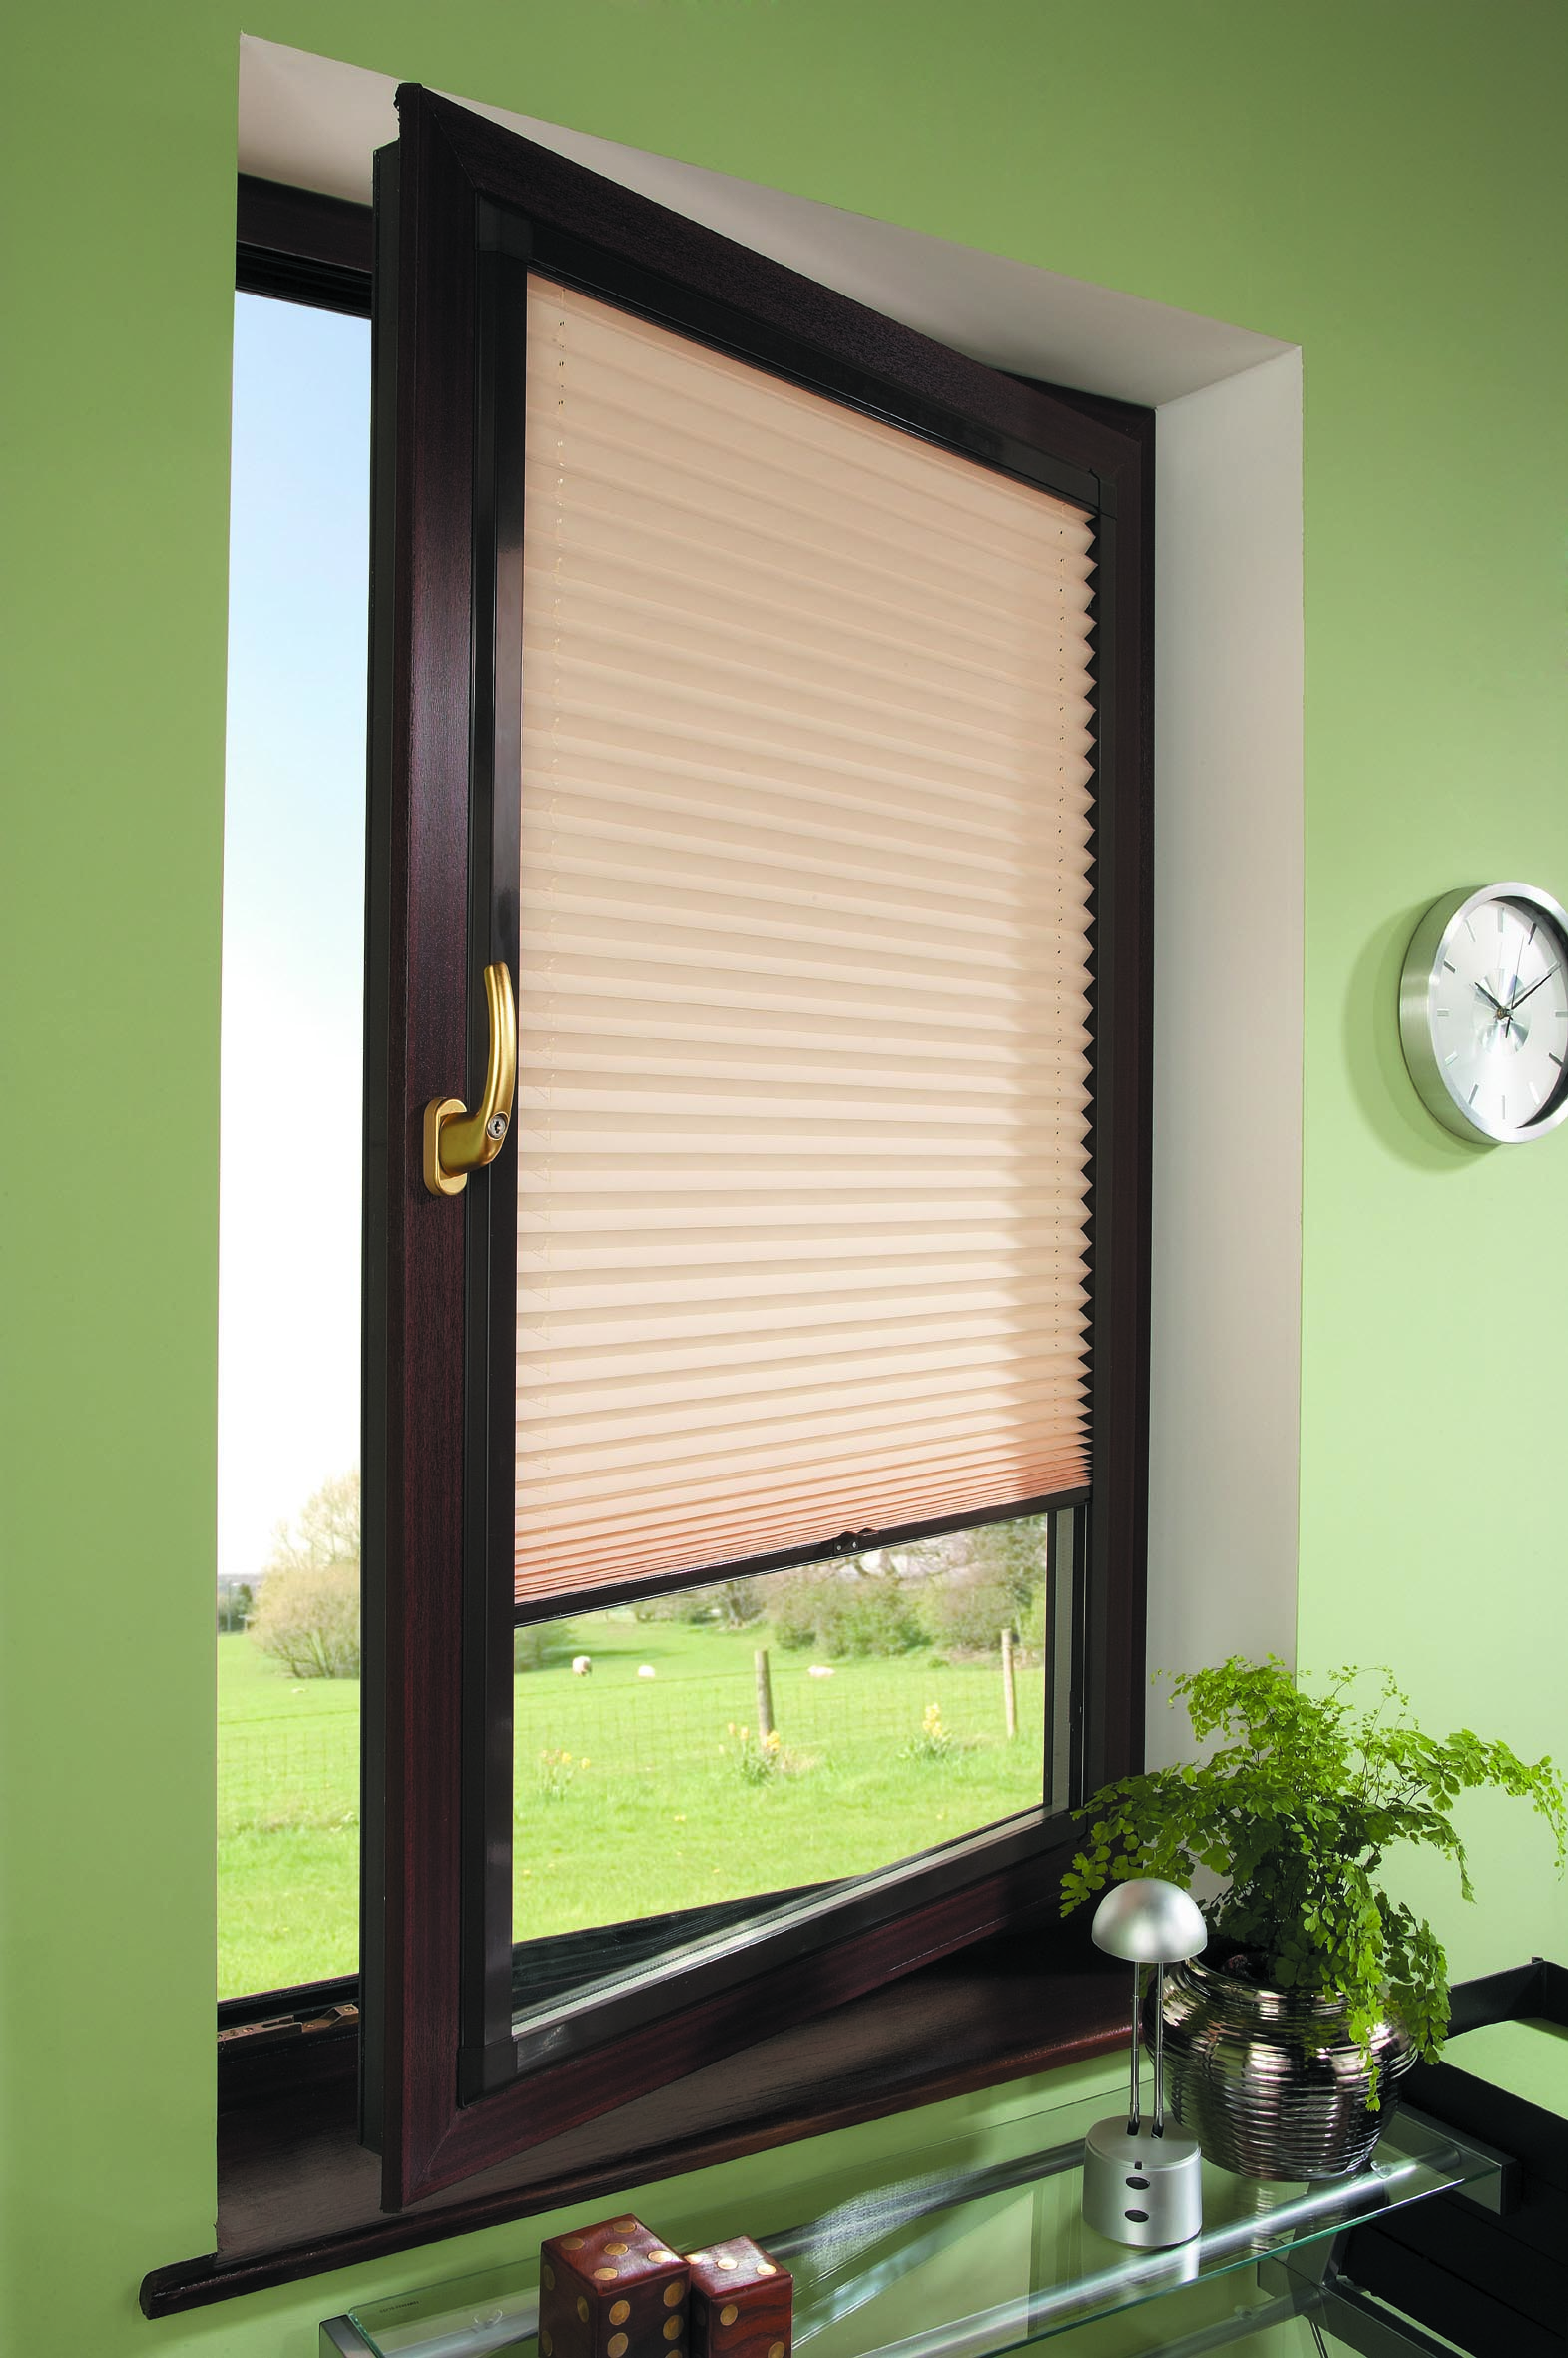 Perfect Fit Blinds for UPVC windows